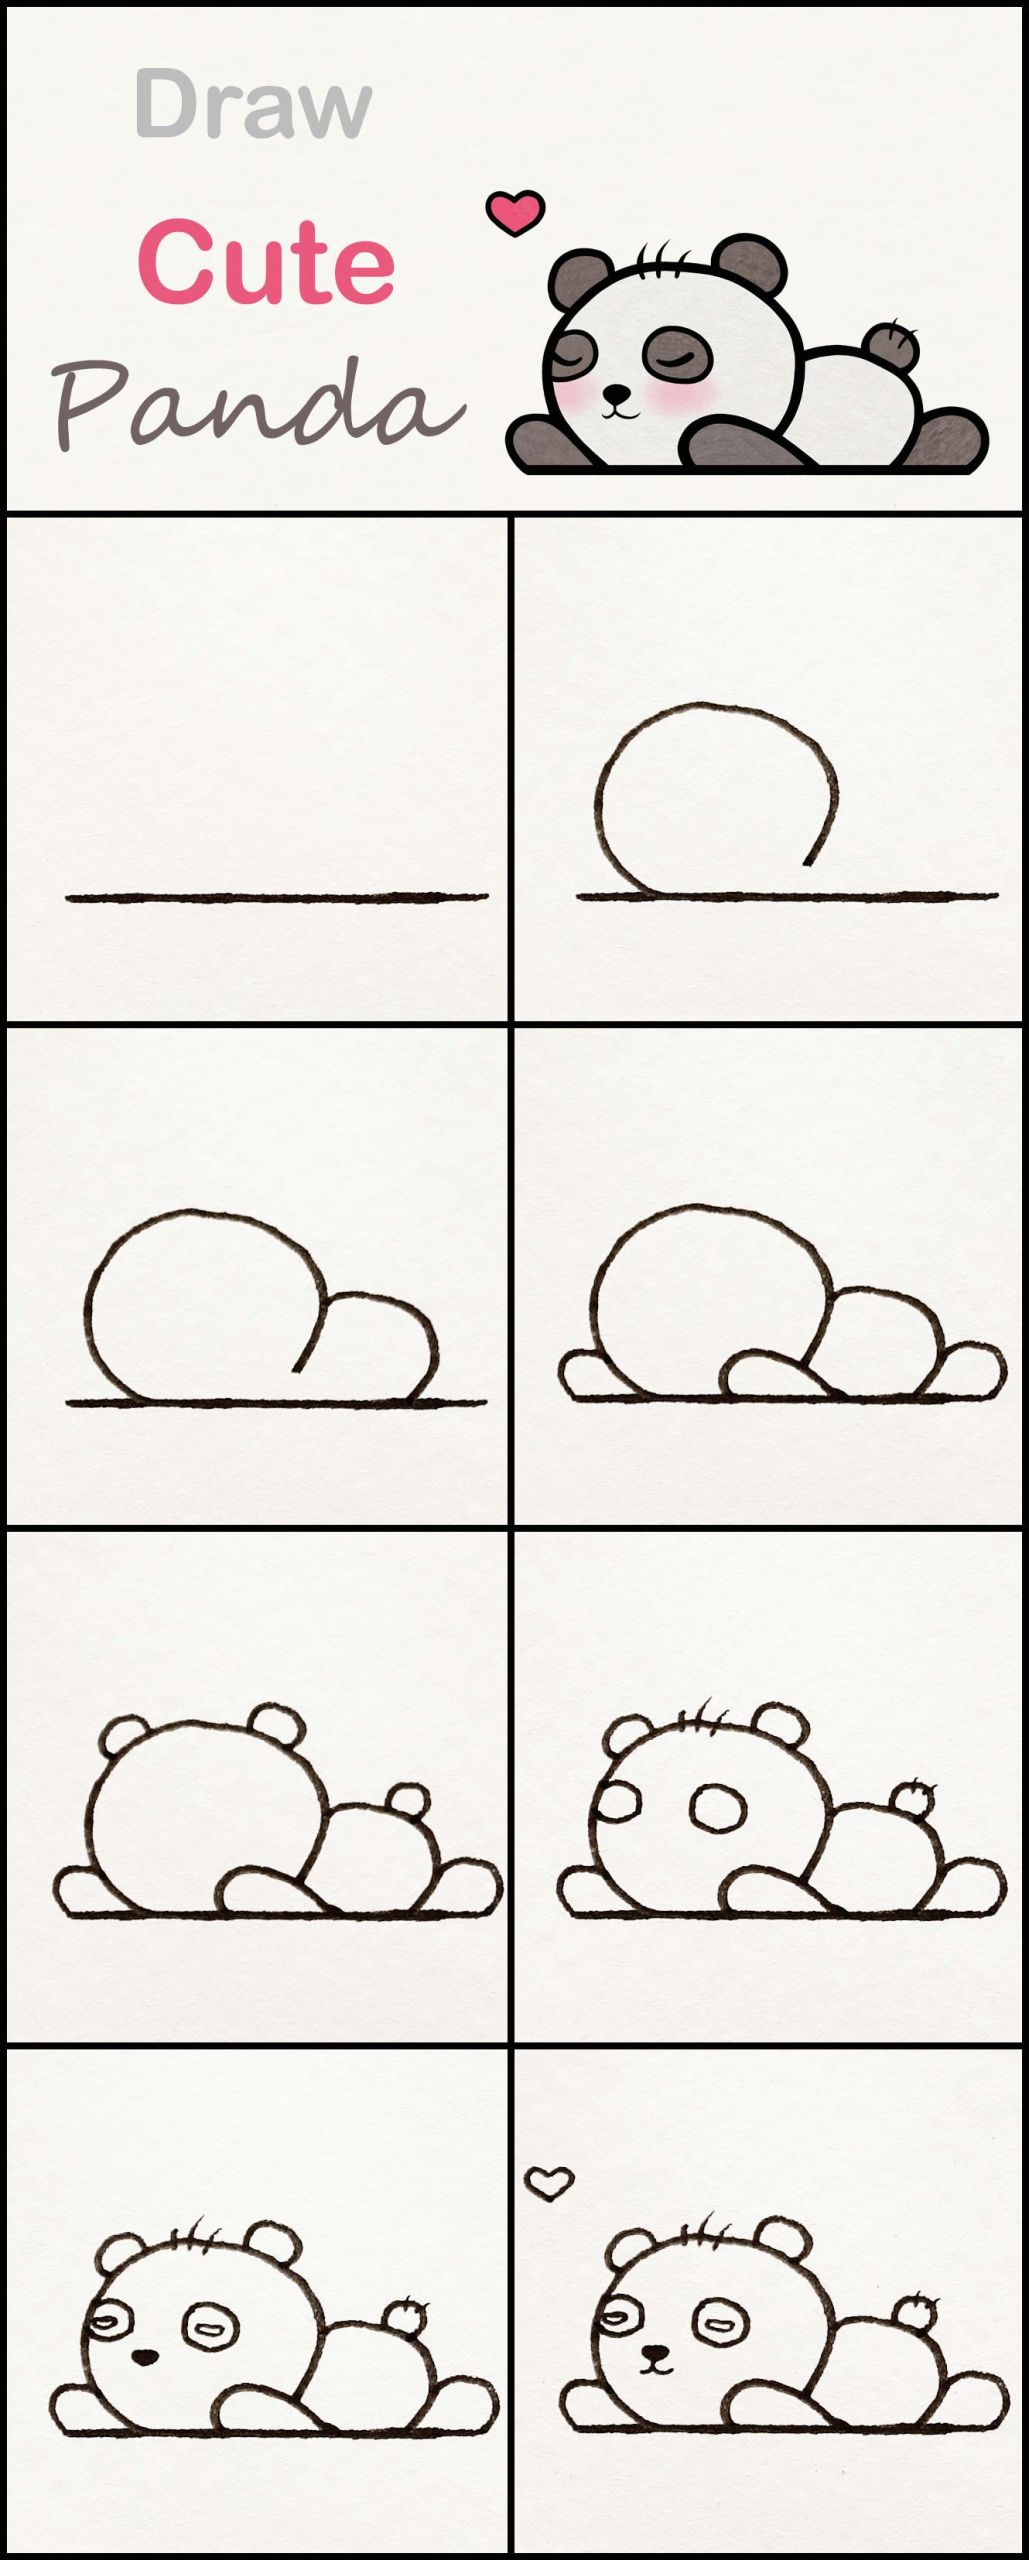 Pictures to Draw Easy Cute Learn How to Draw A Cute Baby Panda Step by Step A Very